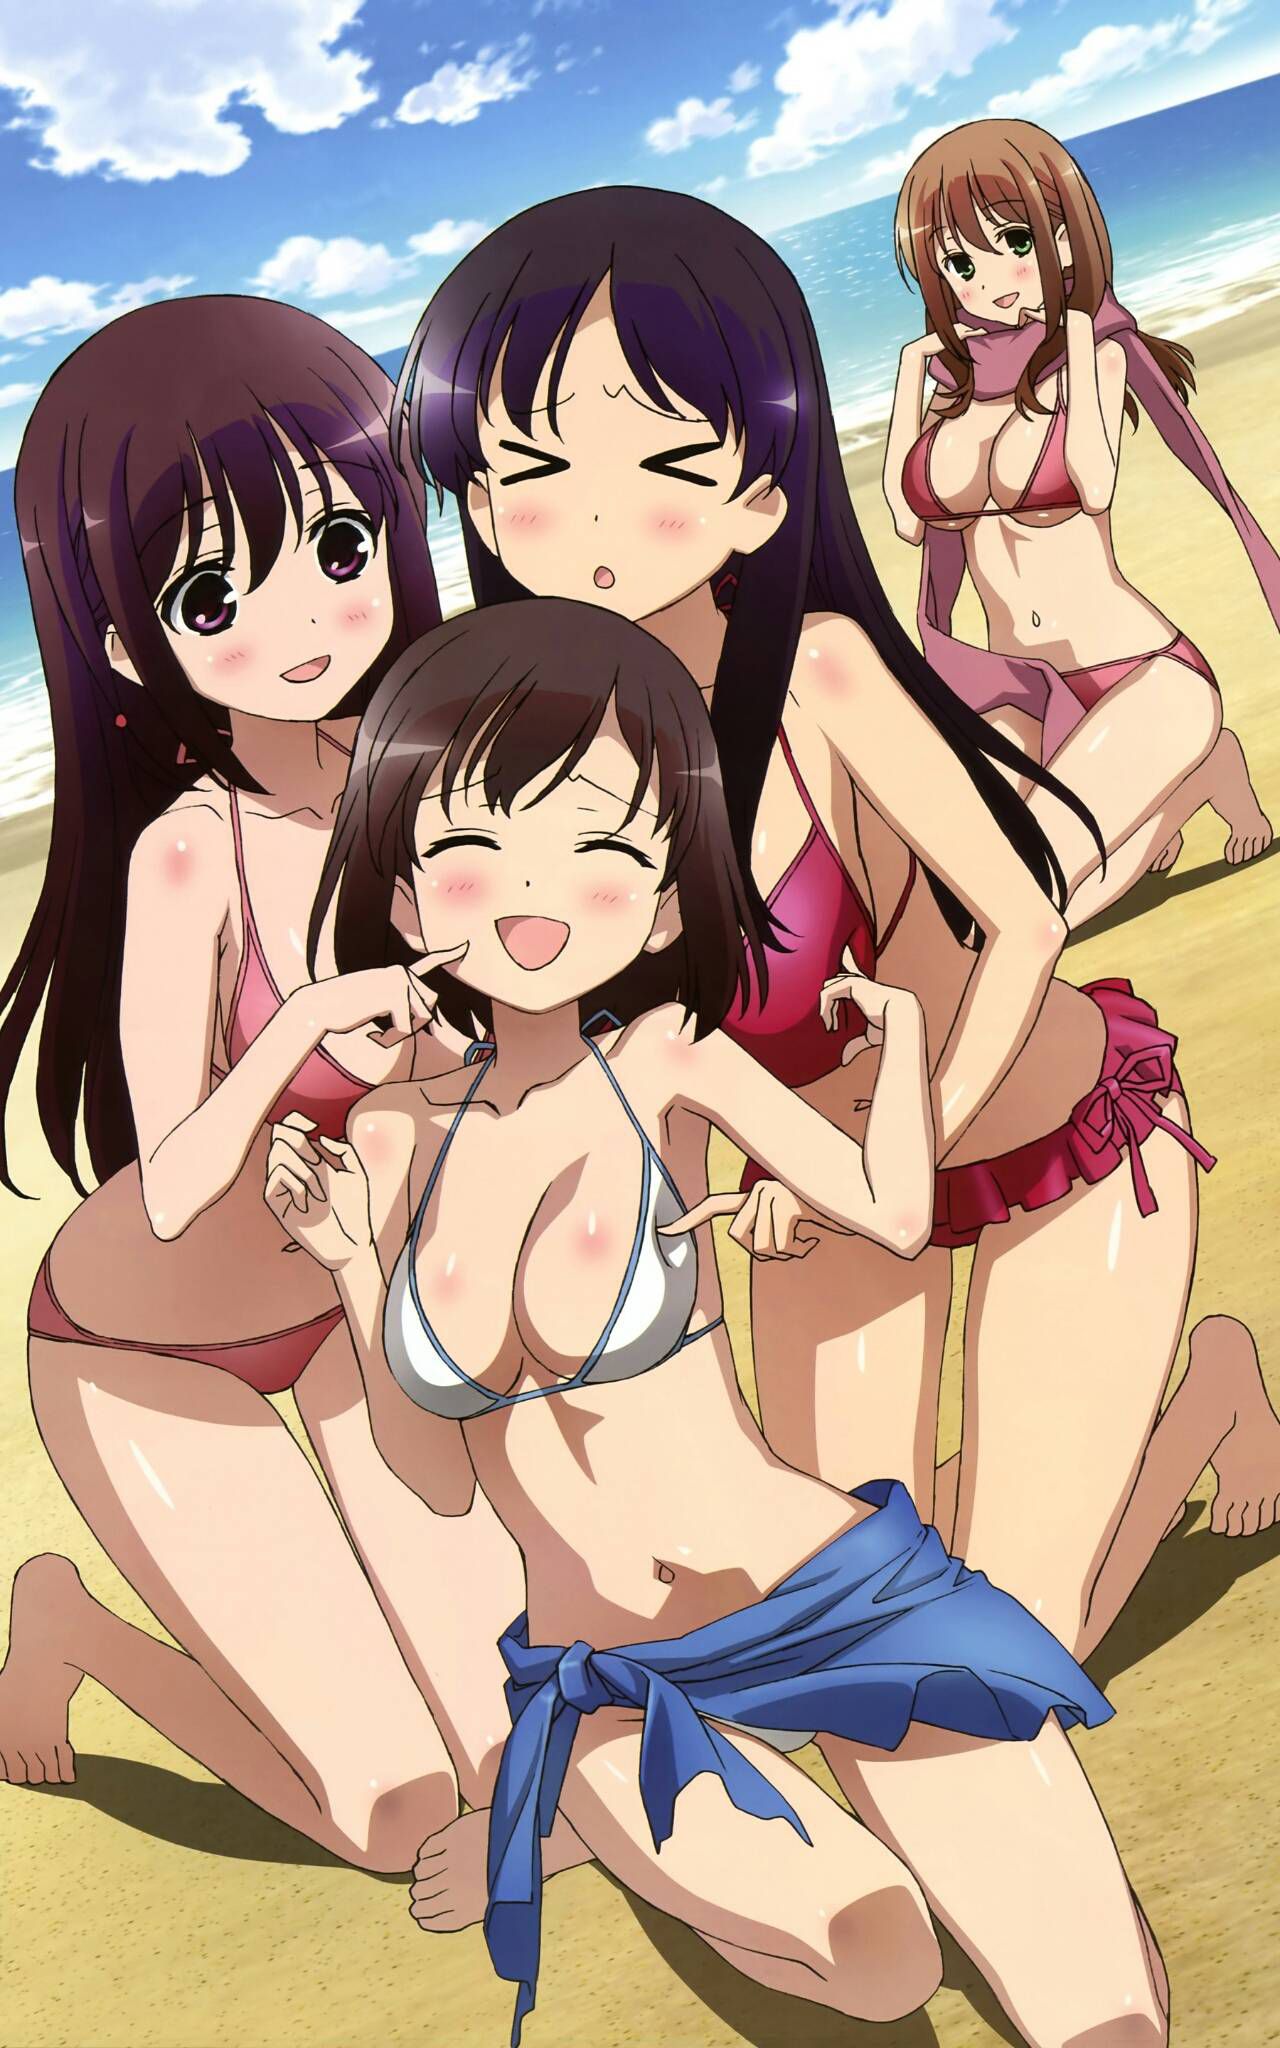 Yuri image once in a while I see with other girls too! 29